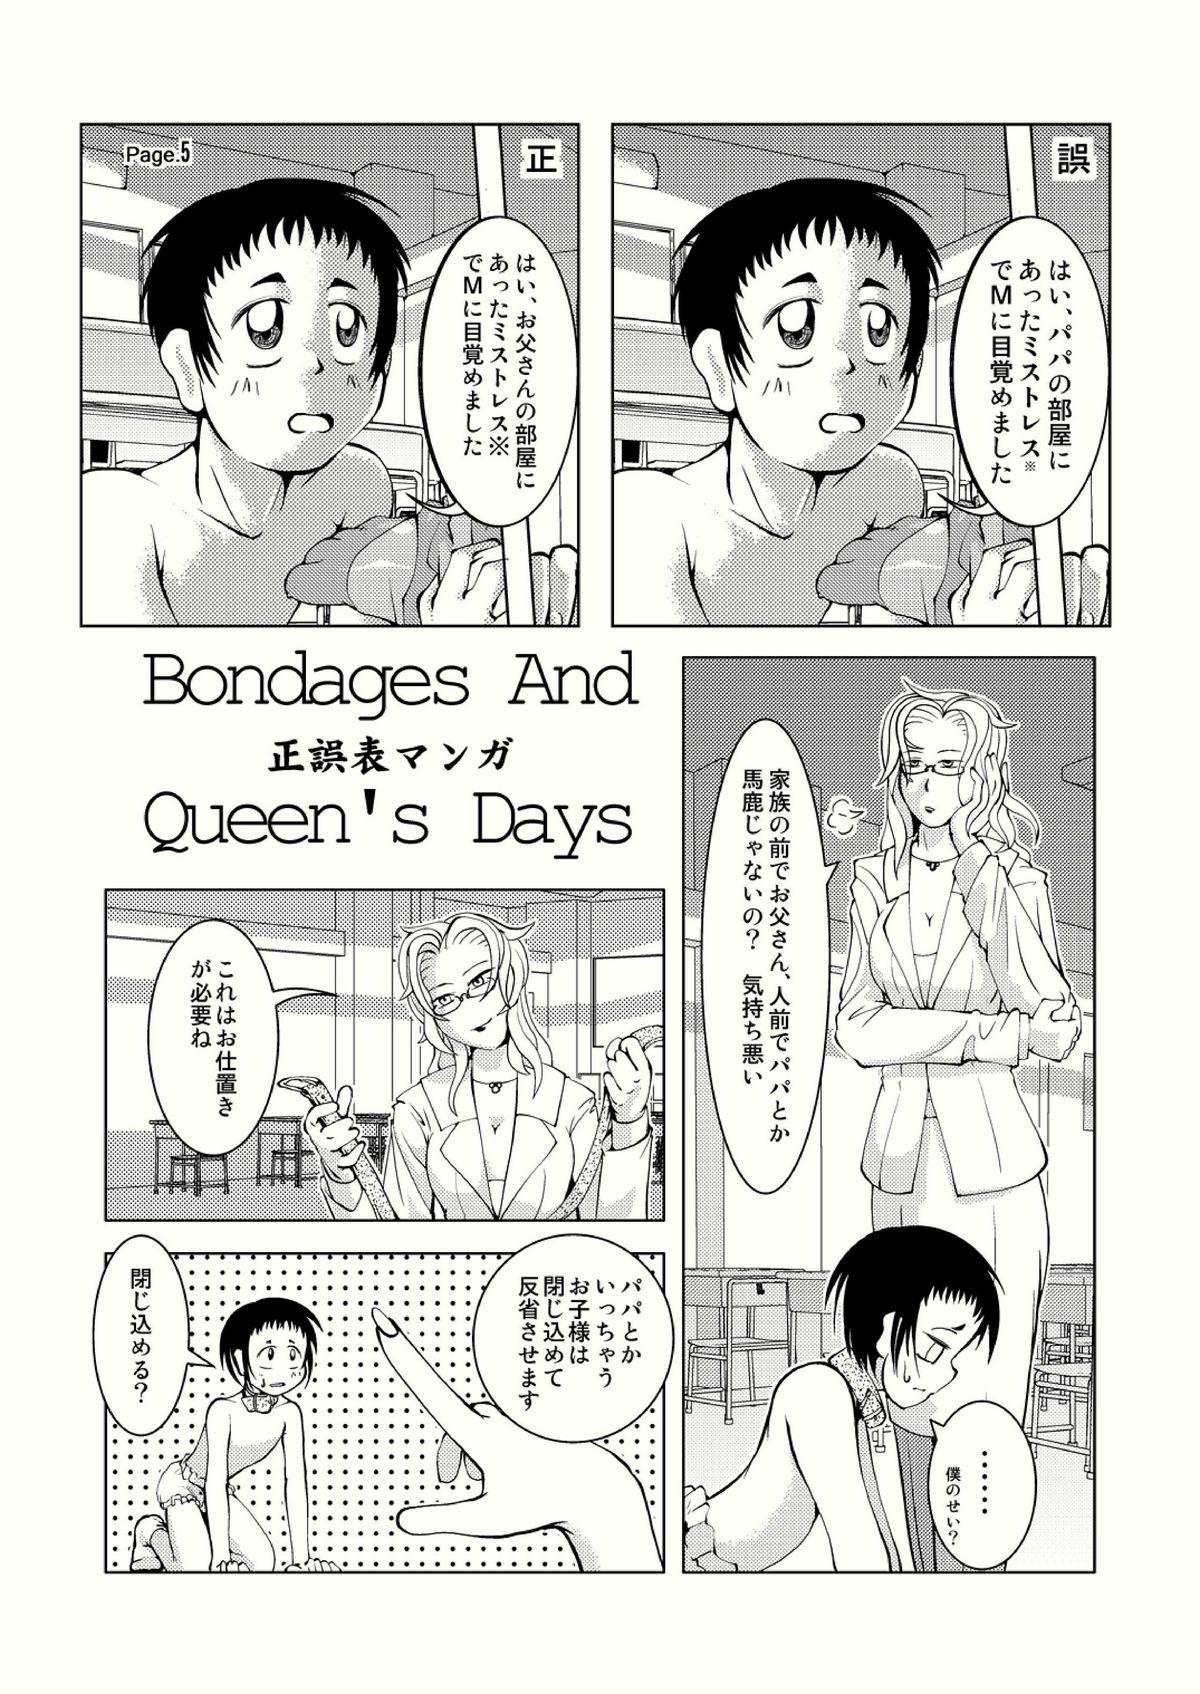 Made Bondages and Queens Days Aunty - Page 43